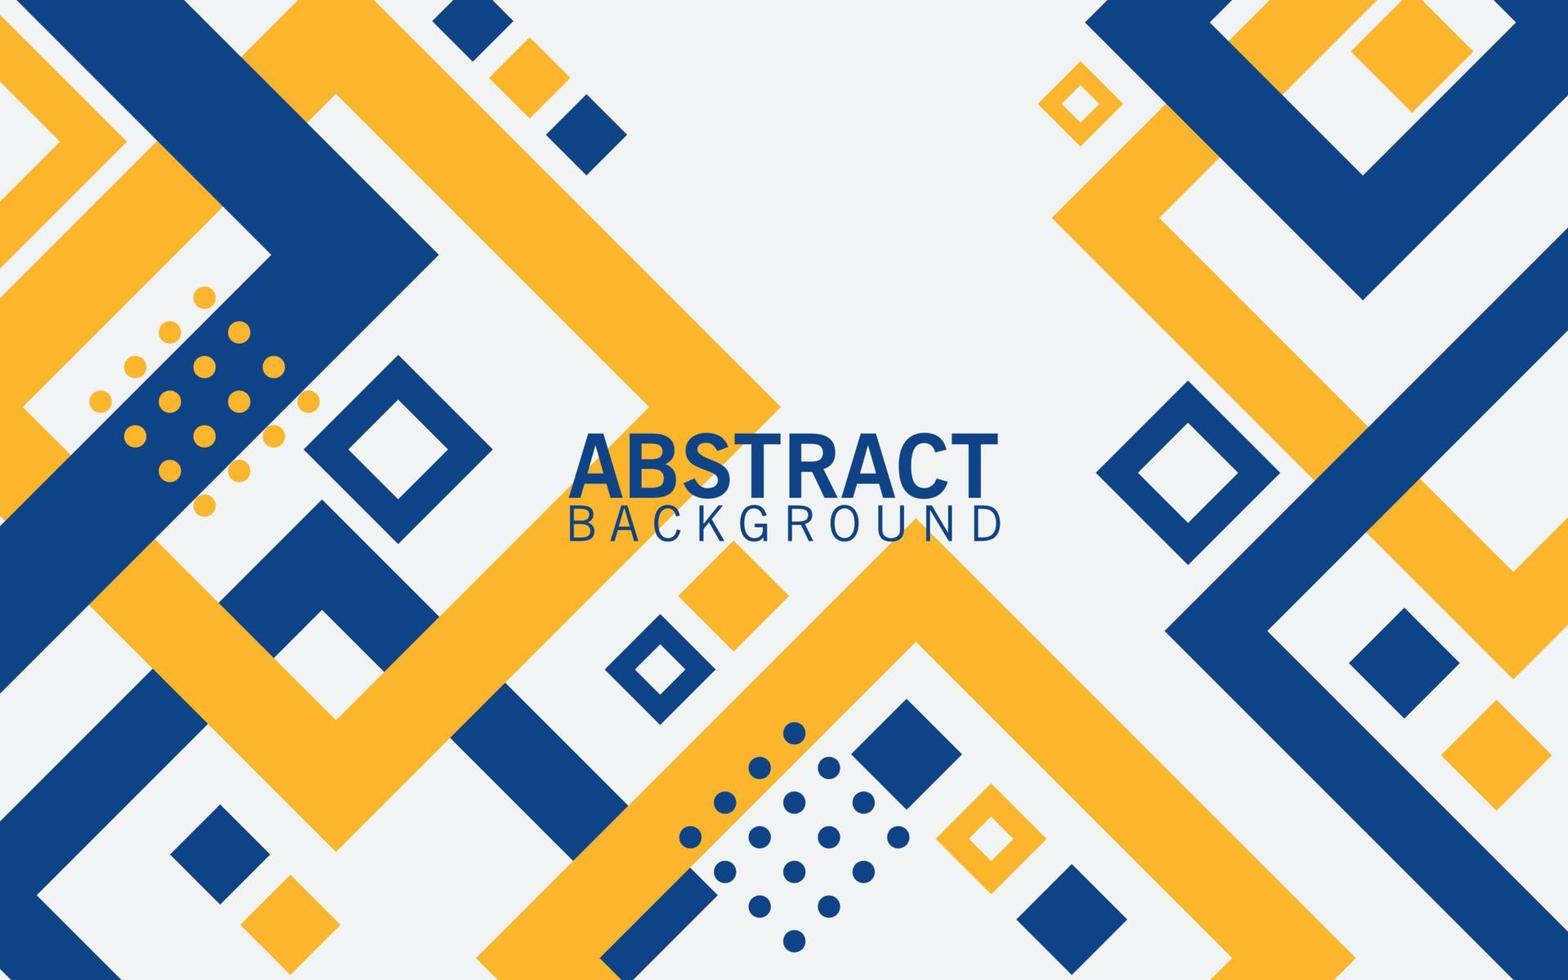 abstract modern blue yellow geometric square shapes design background wallpaper vector illustration